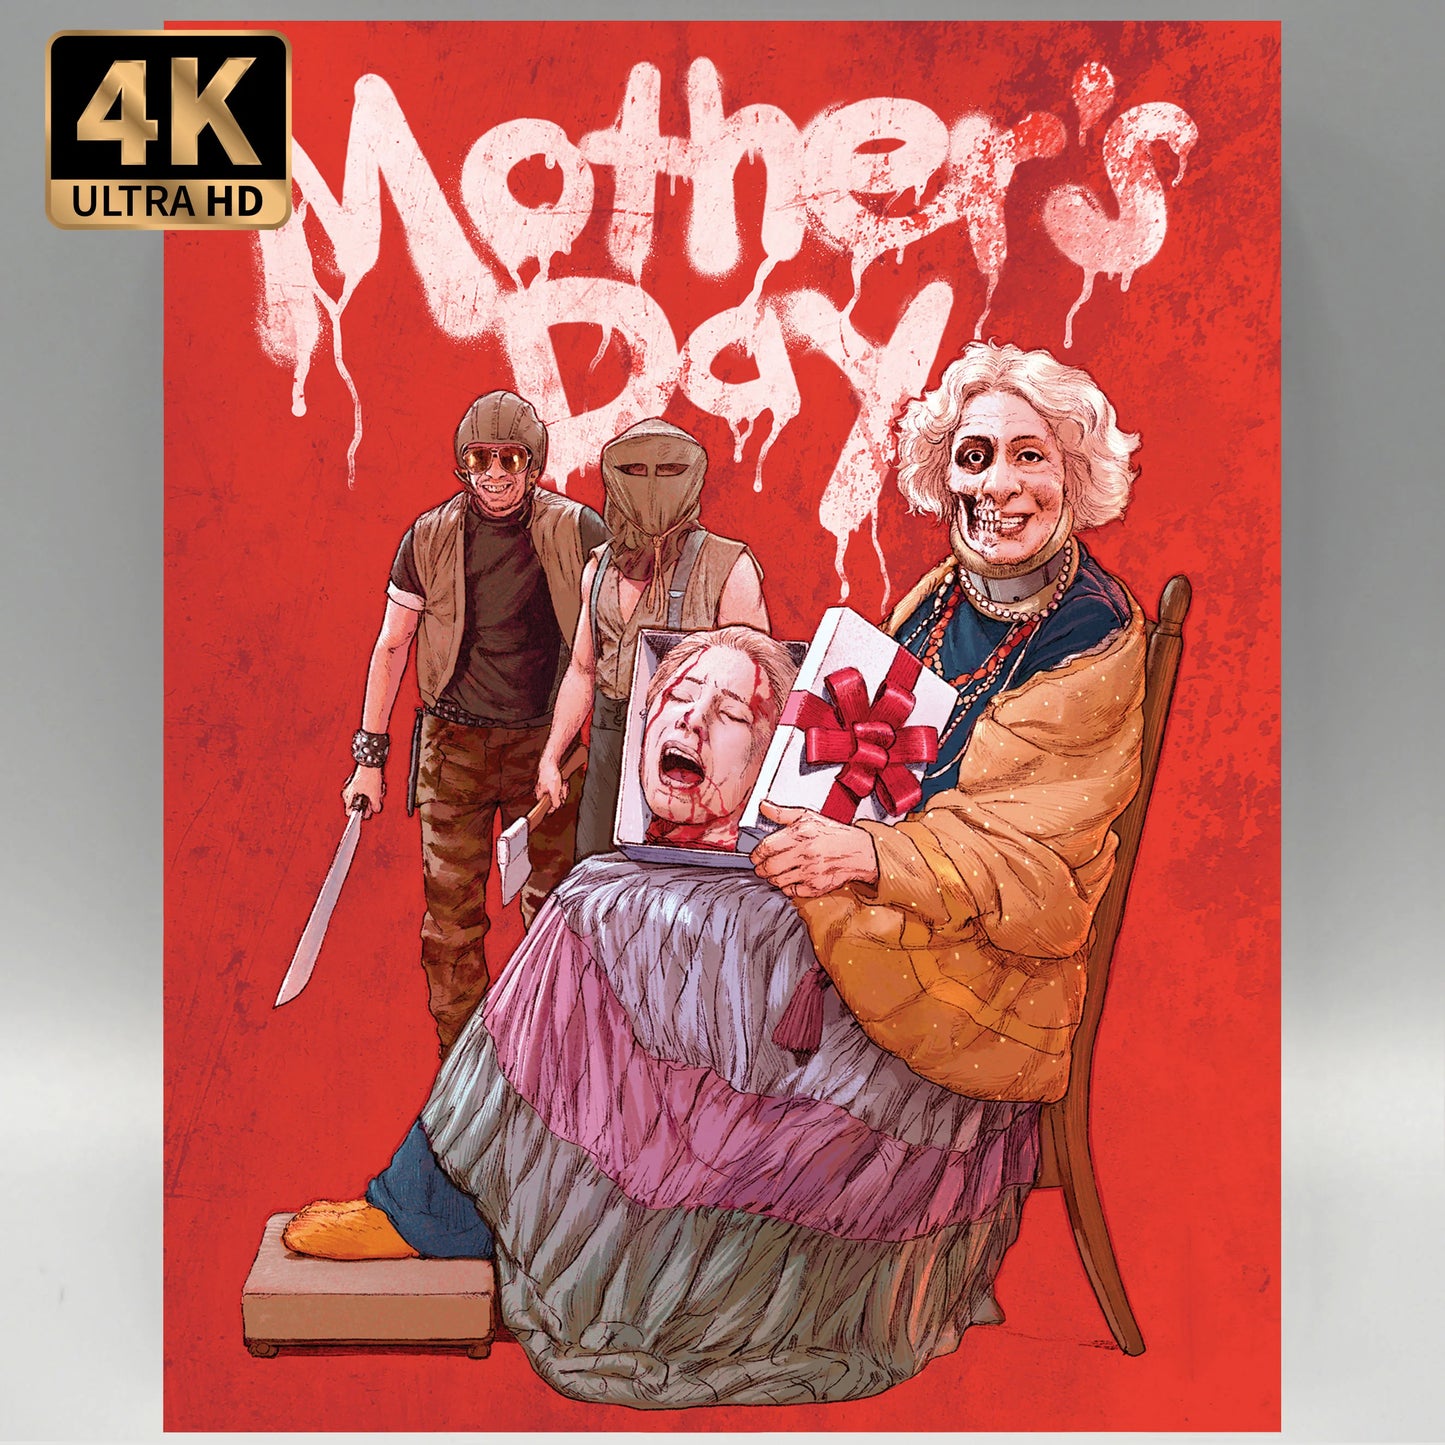 Mother's Day 4K UHD + Blu-ray with Limited Edition Slipcover (Vinegar Syndrome)